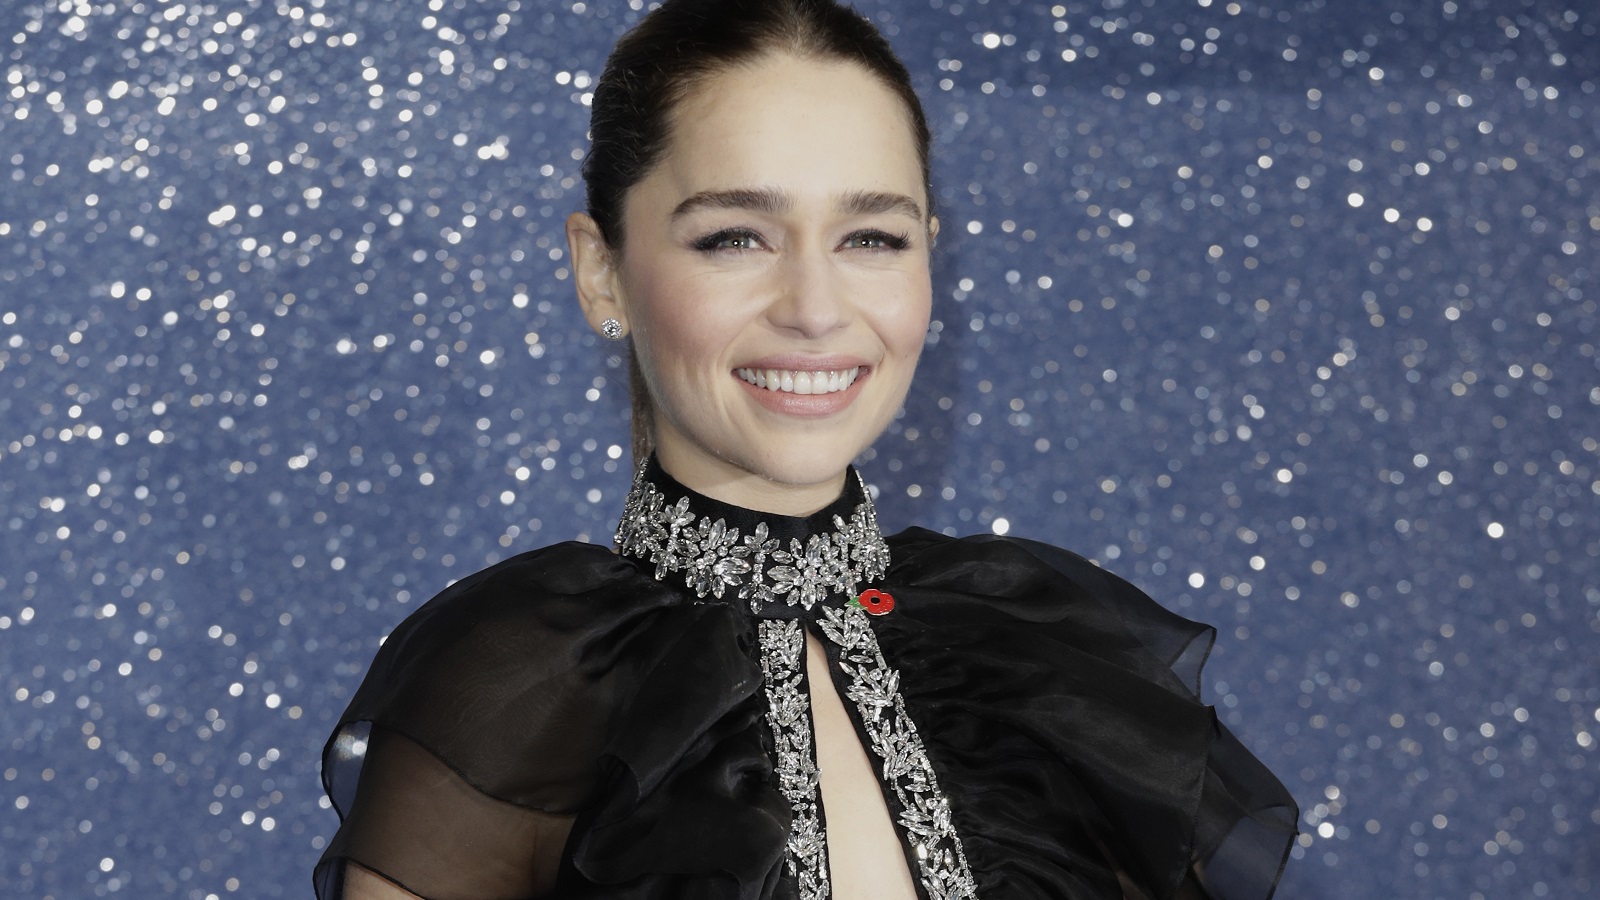 What Role Is Emilia Clarke Playing In 'Secret Invasion'? Disney May Have  Accidentally Revealed Her Role In MCU - Entertainment